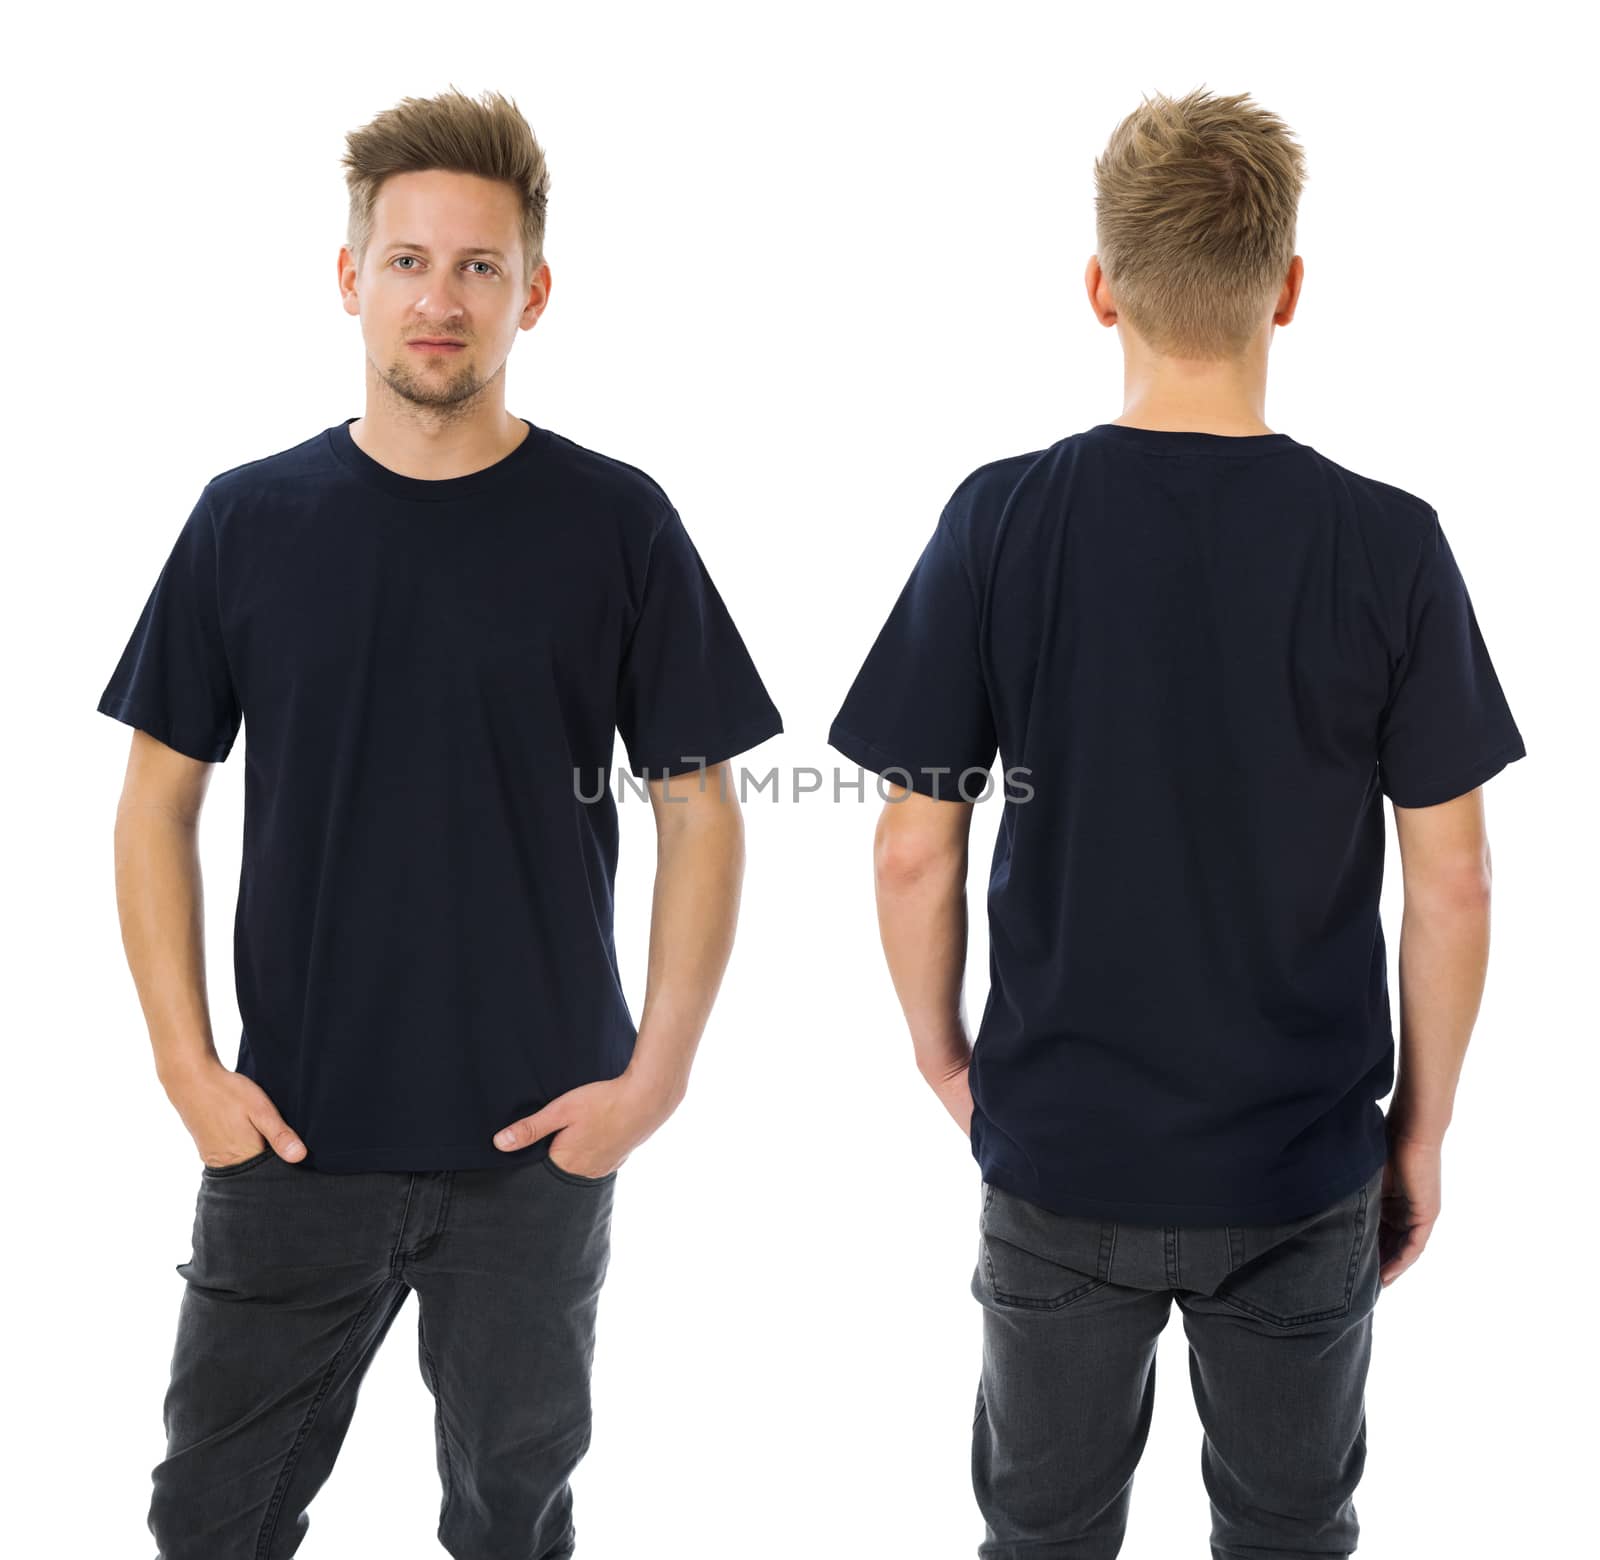 Photo of a man wearing blank dark blue t-shirt, front and back. Ready for your design or artwork.